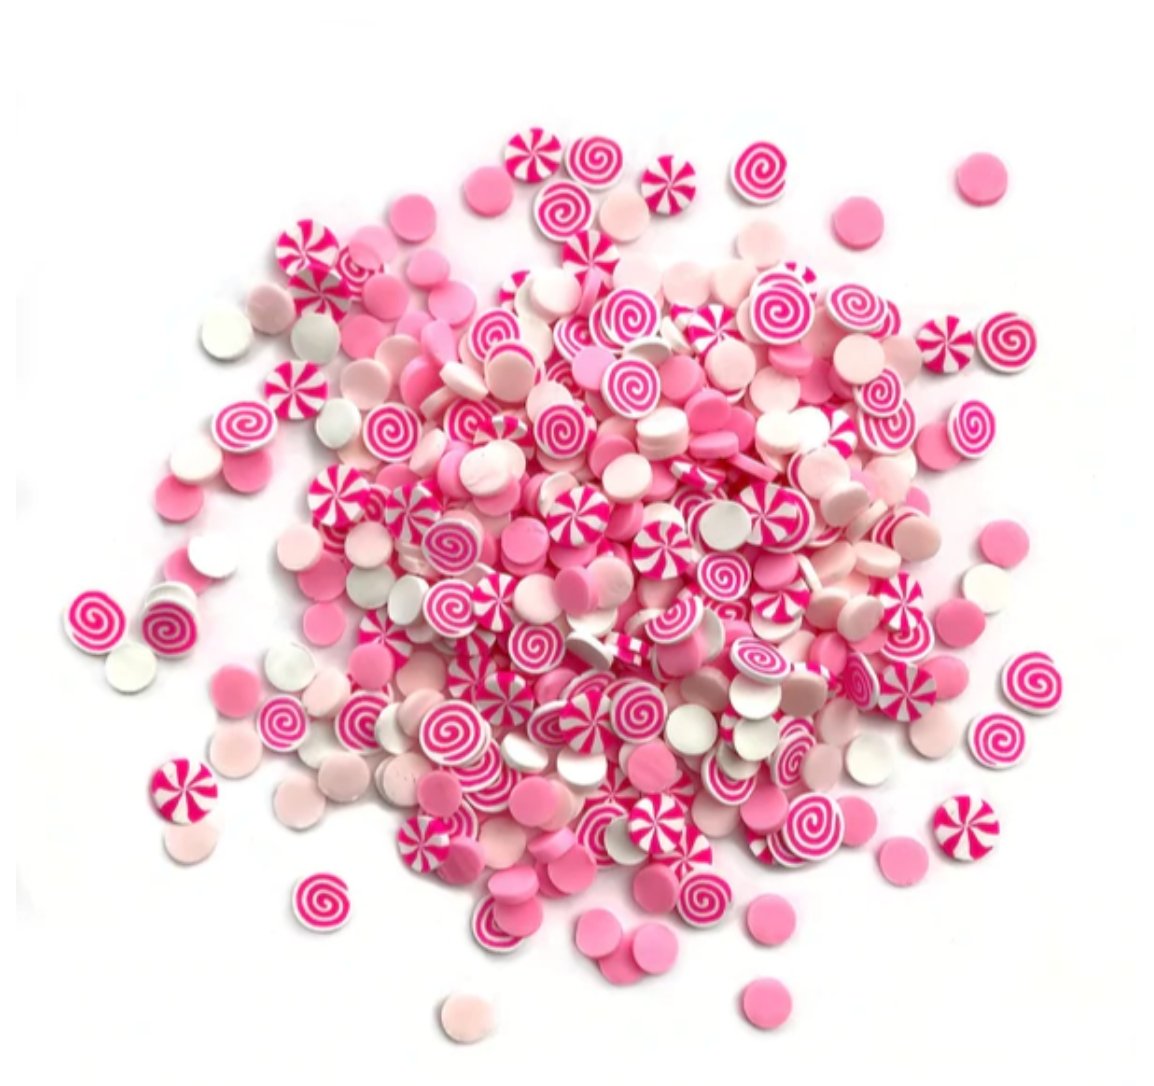 Buttons Galore - Sprinkletz - Pink It Up -  Embellishments Buttons Galore